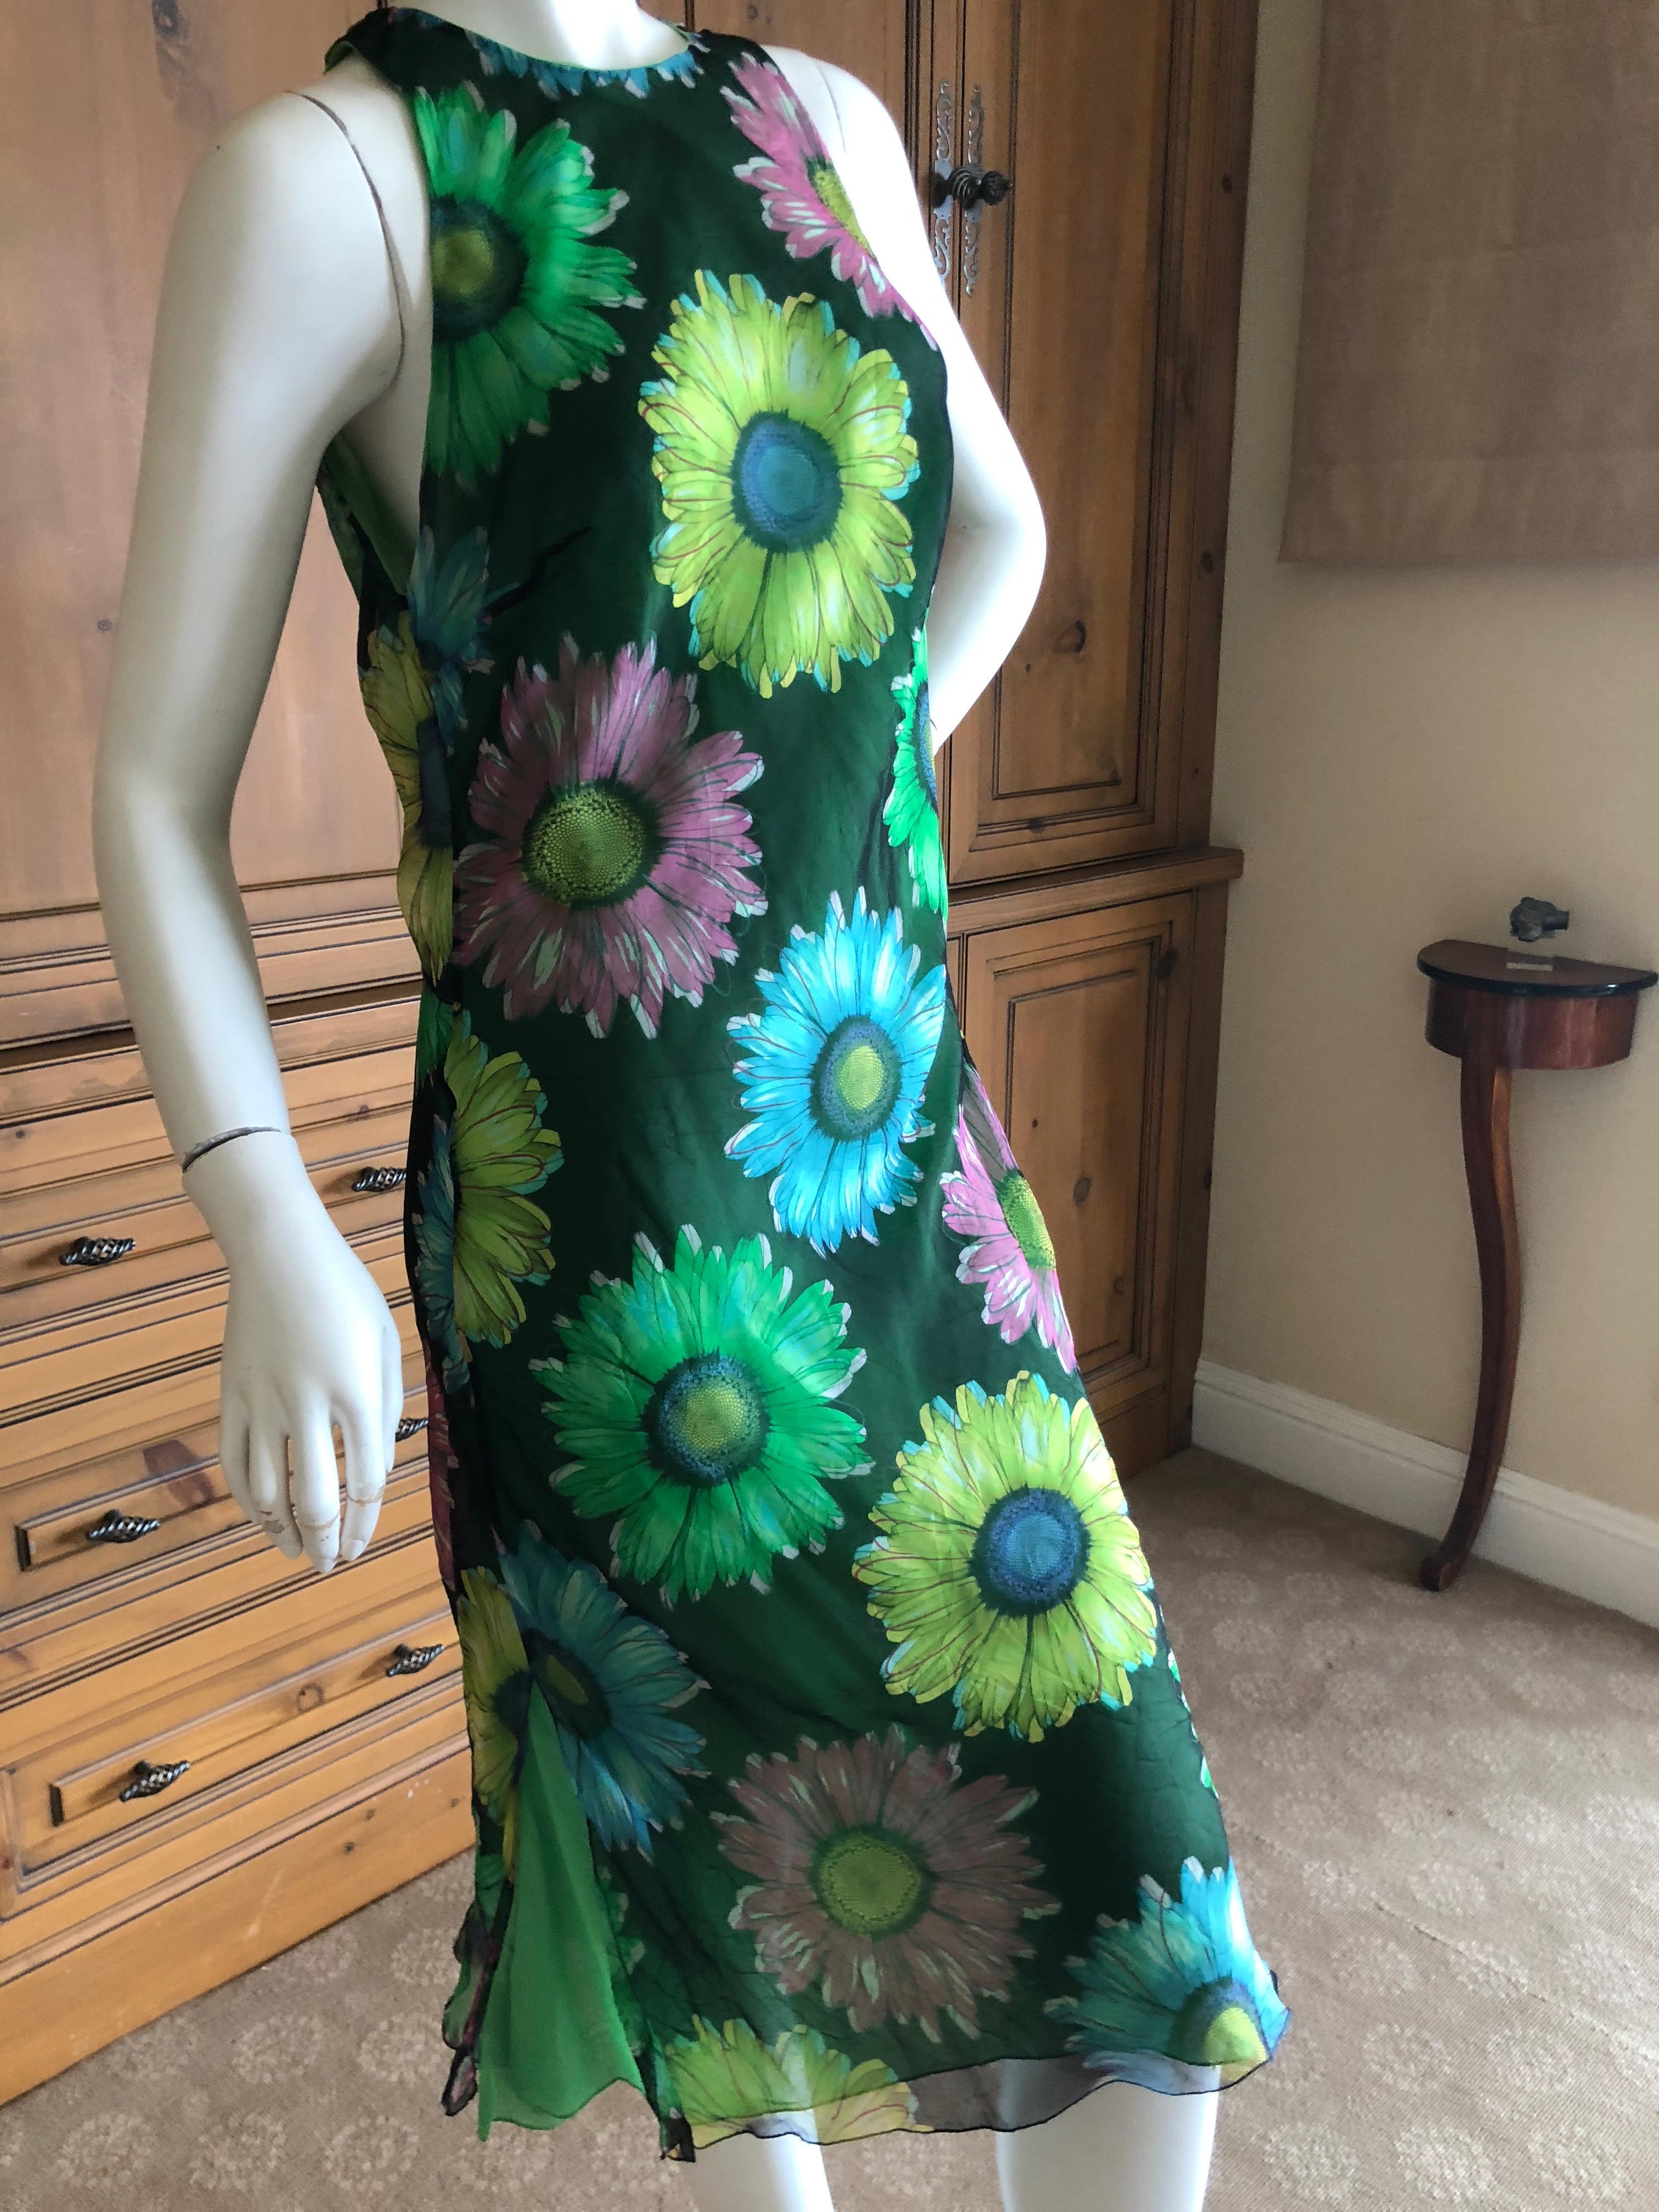 Gianni Versace Couture Vintage Warhol Daisy Print SIlk Dress 1992.
Size large, marked size 46

Bust 46